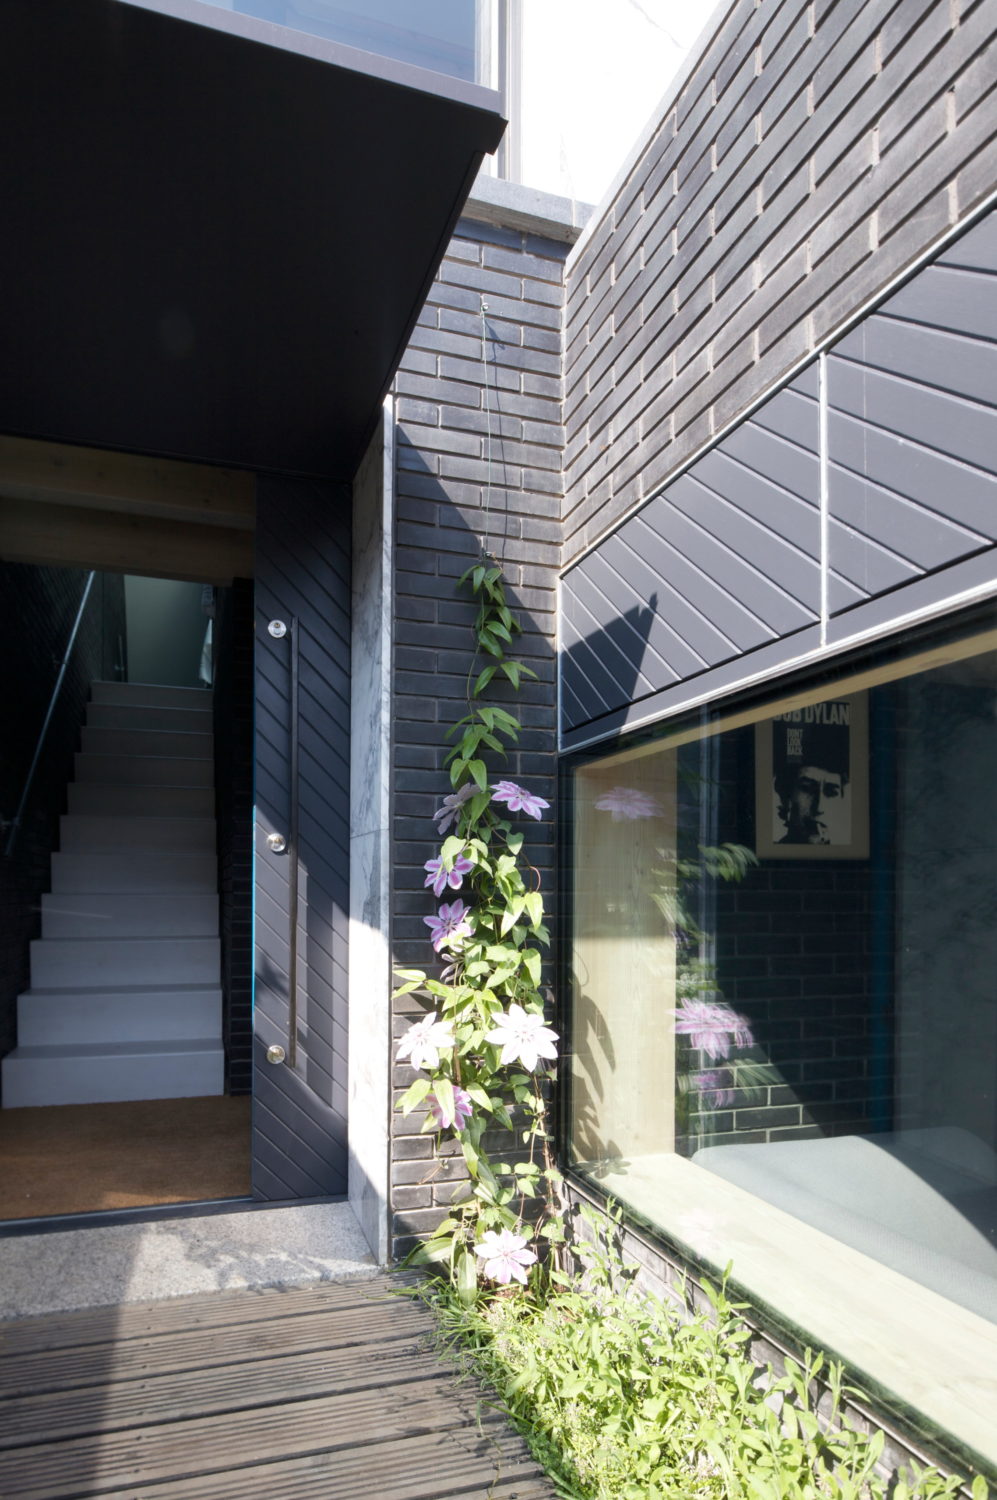 The Shadow House by Liddicoat & Goldhill